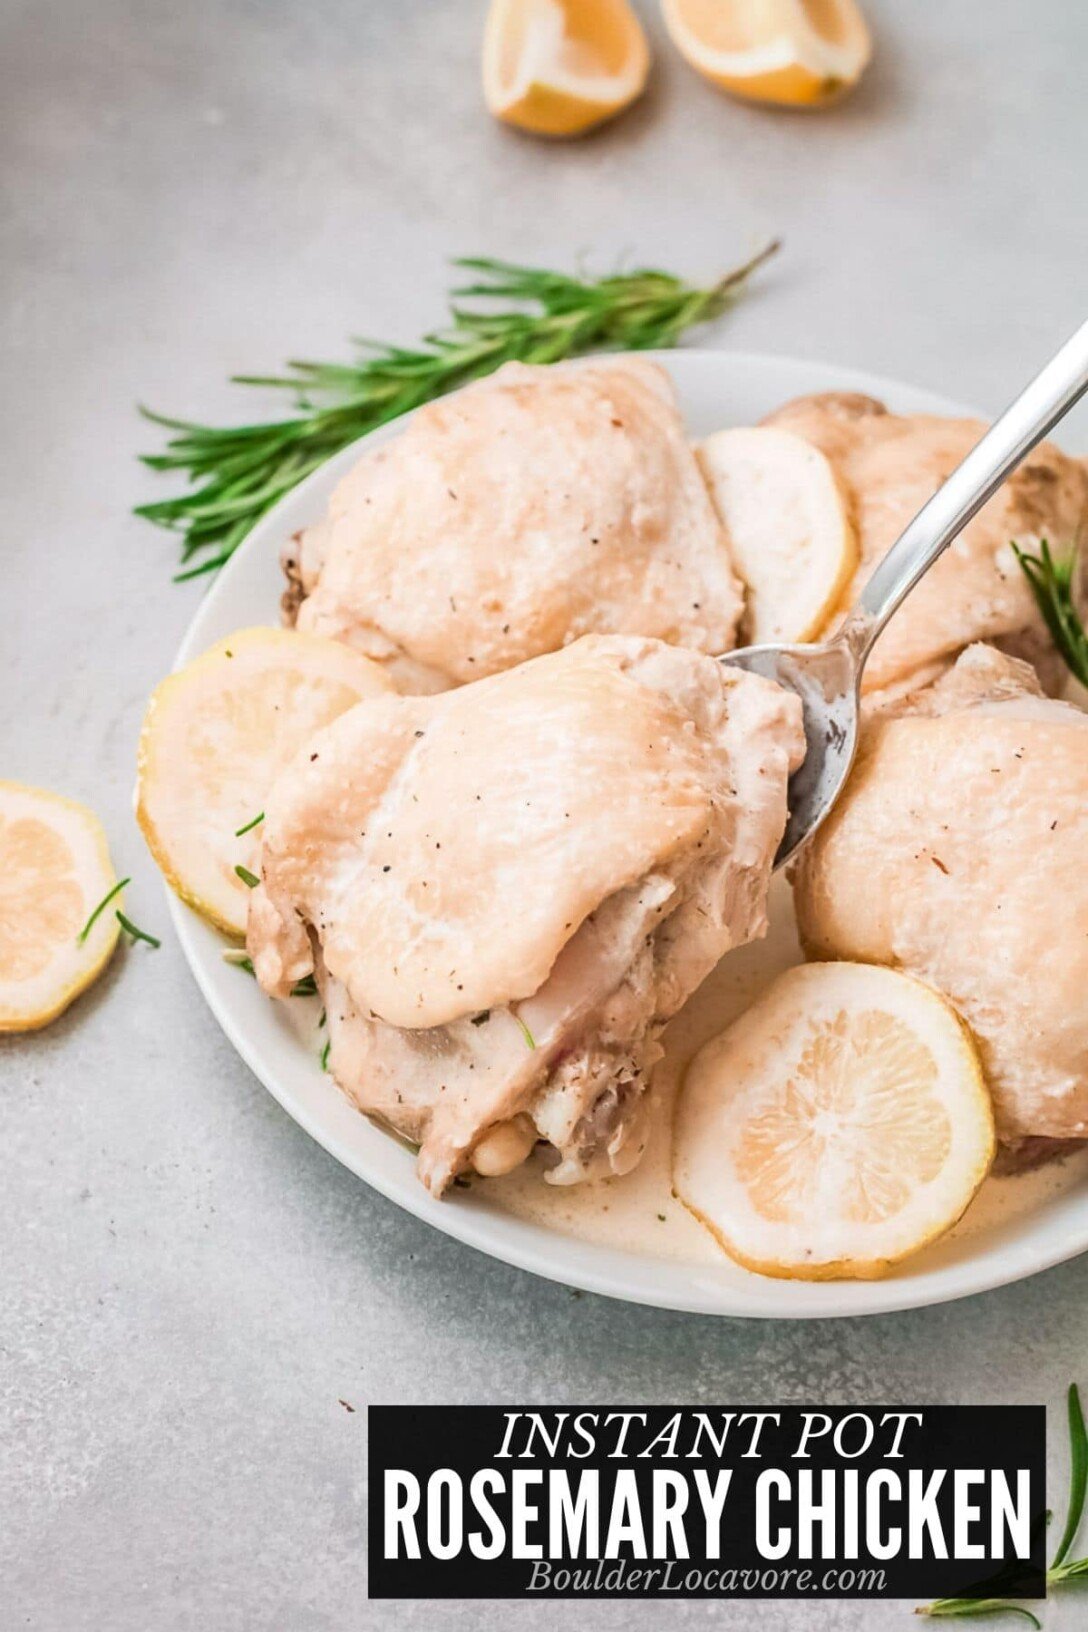 Rosemary chicken in a bowl